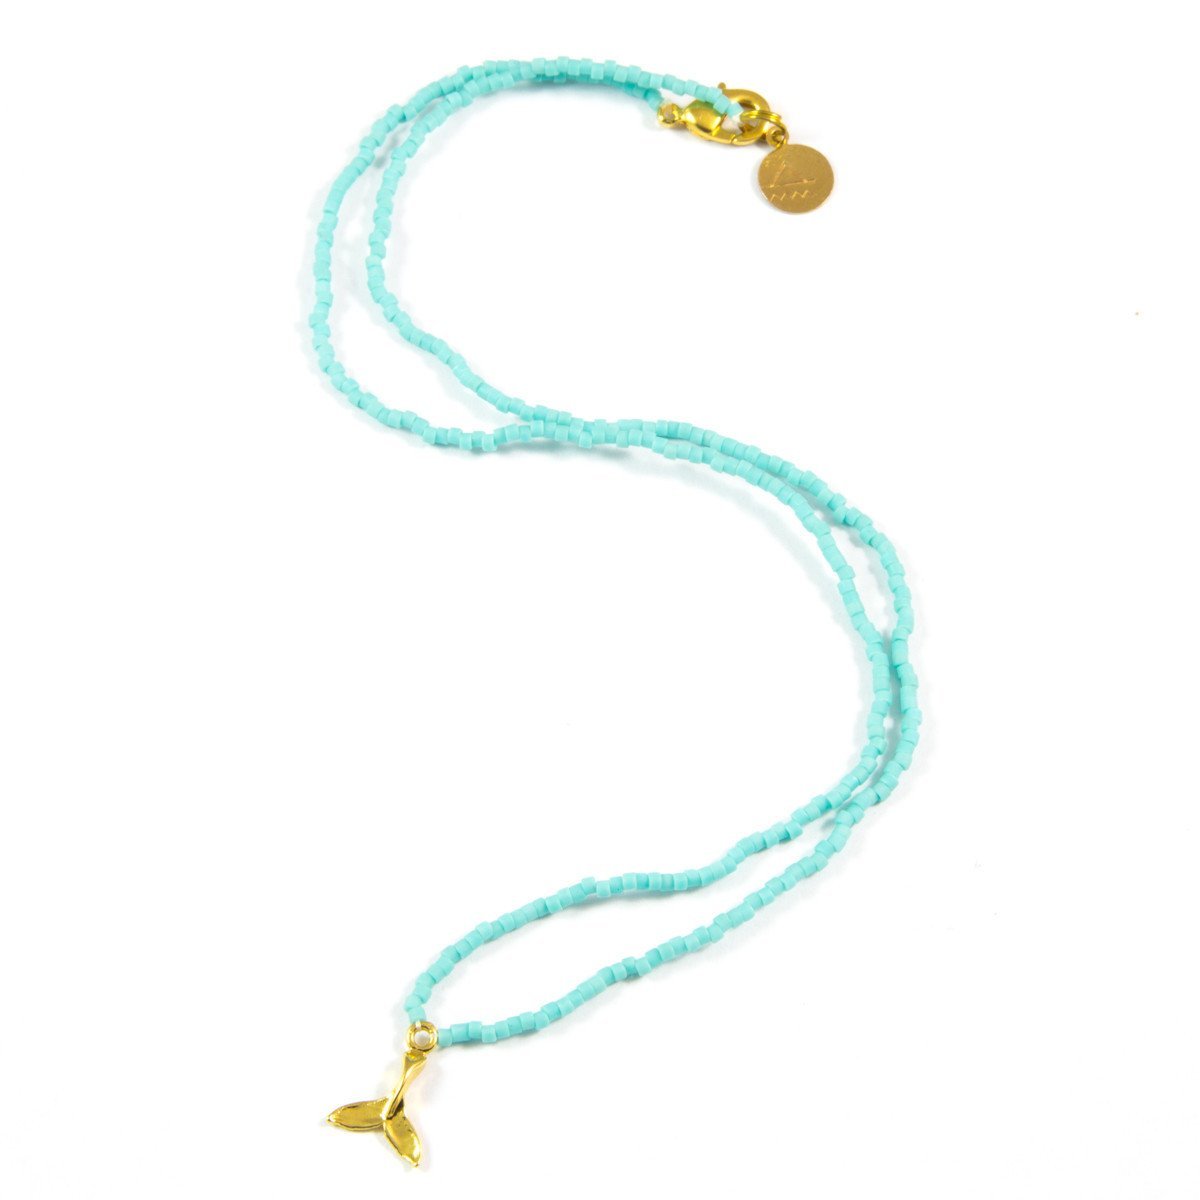 Teal Mermaid Tail Tiny Charm Necklace